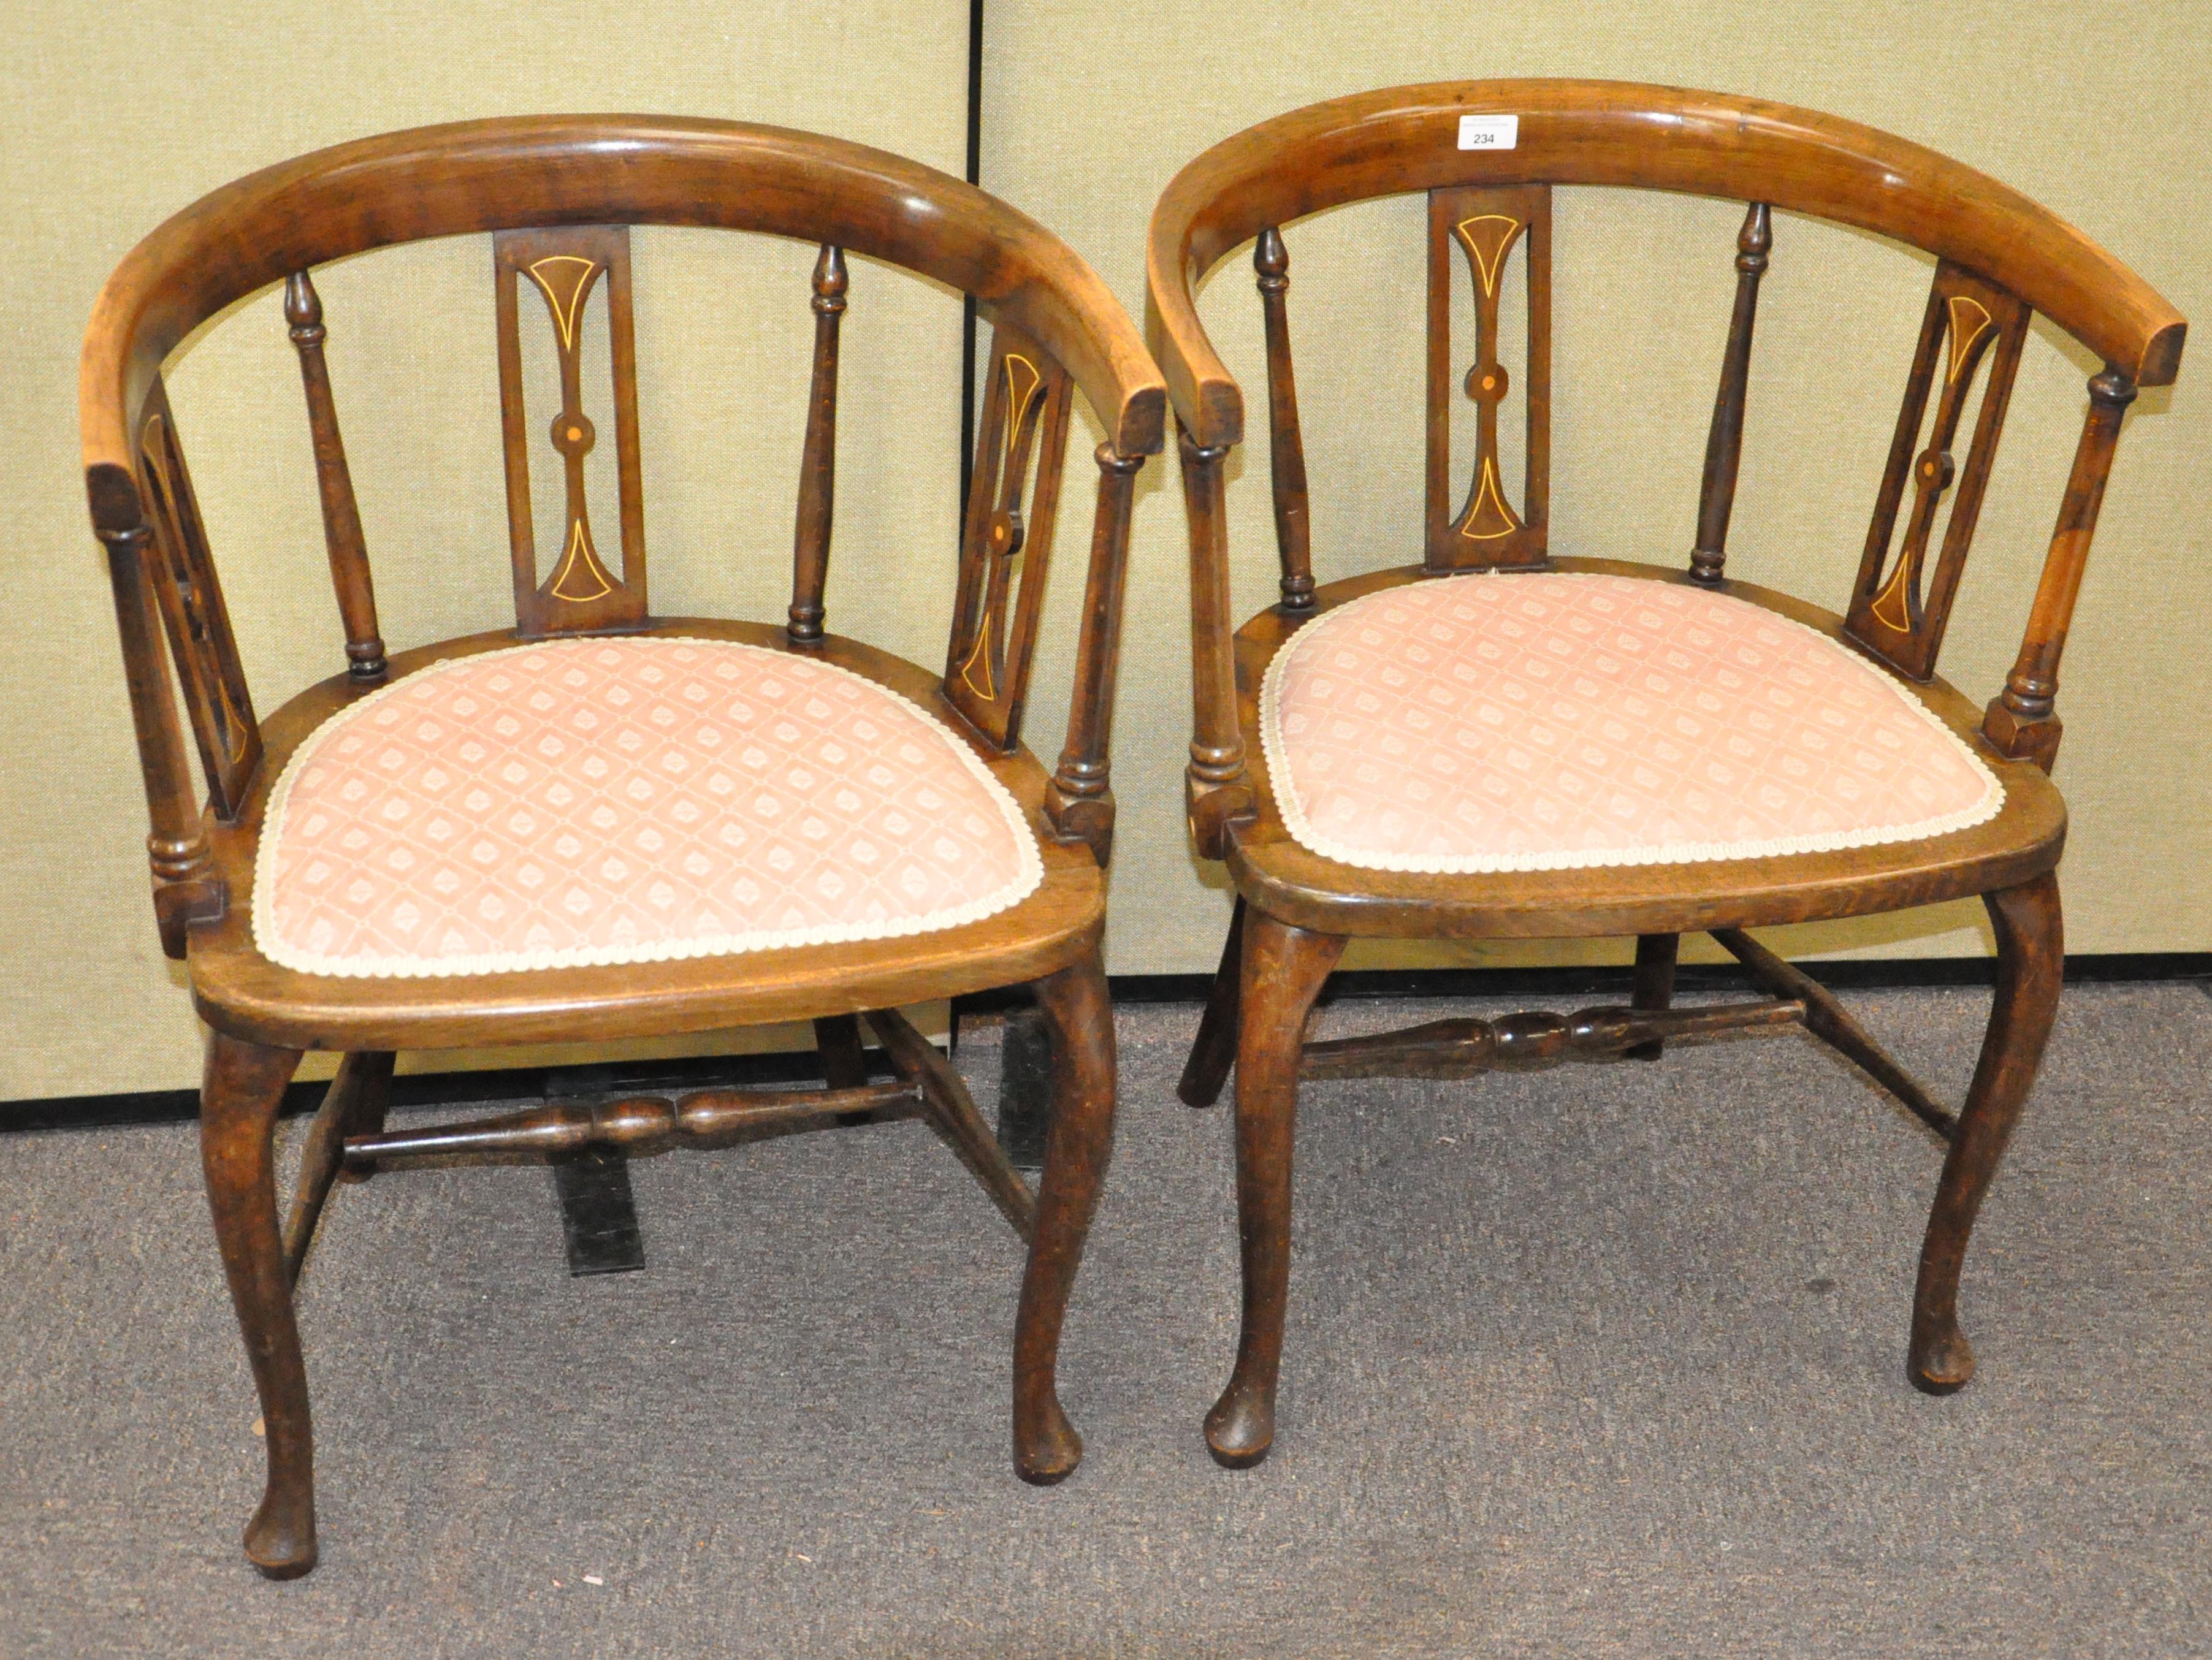 A pair of mahogany tub chairs with inlaid decoration to the back, upholstered seat,